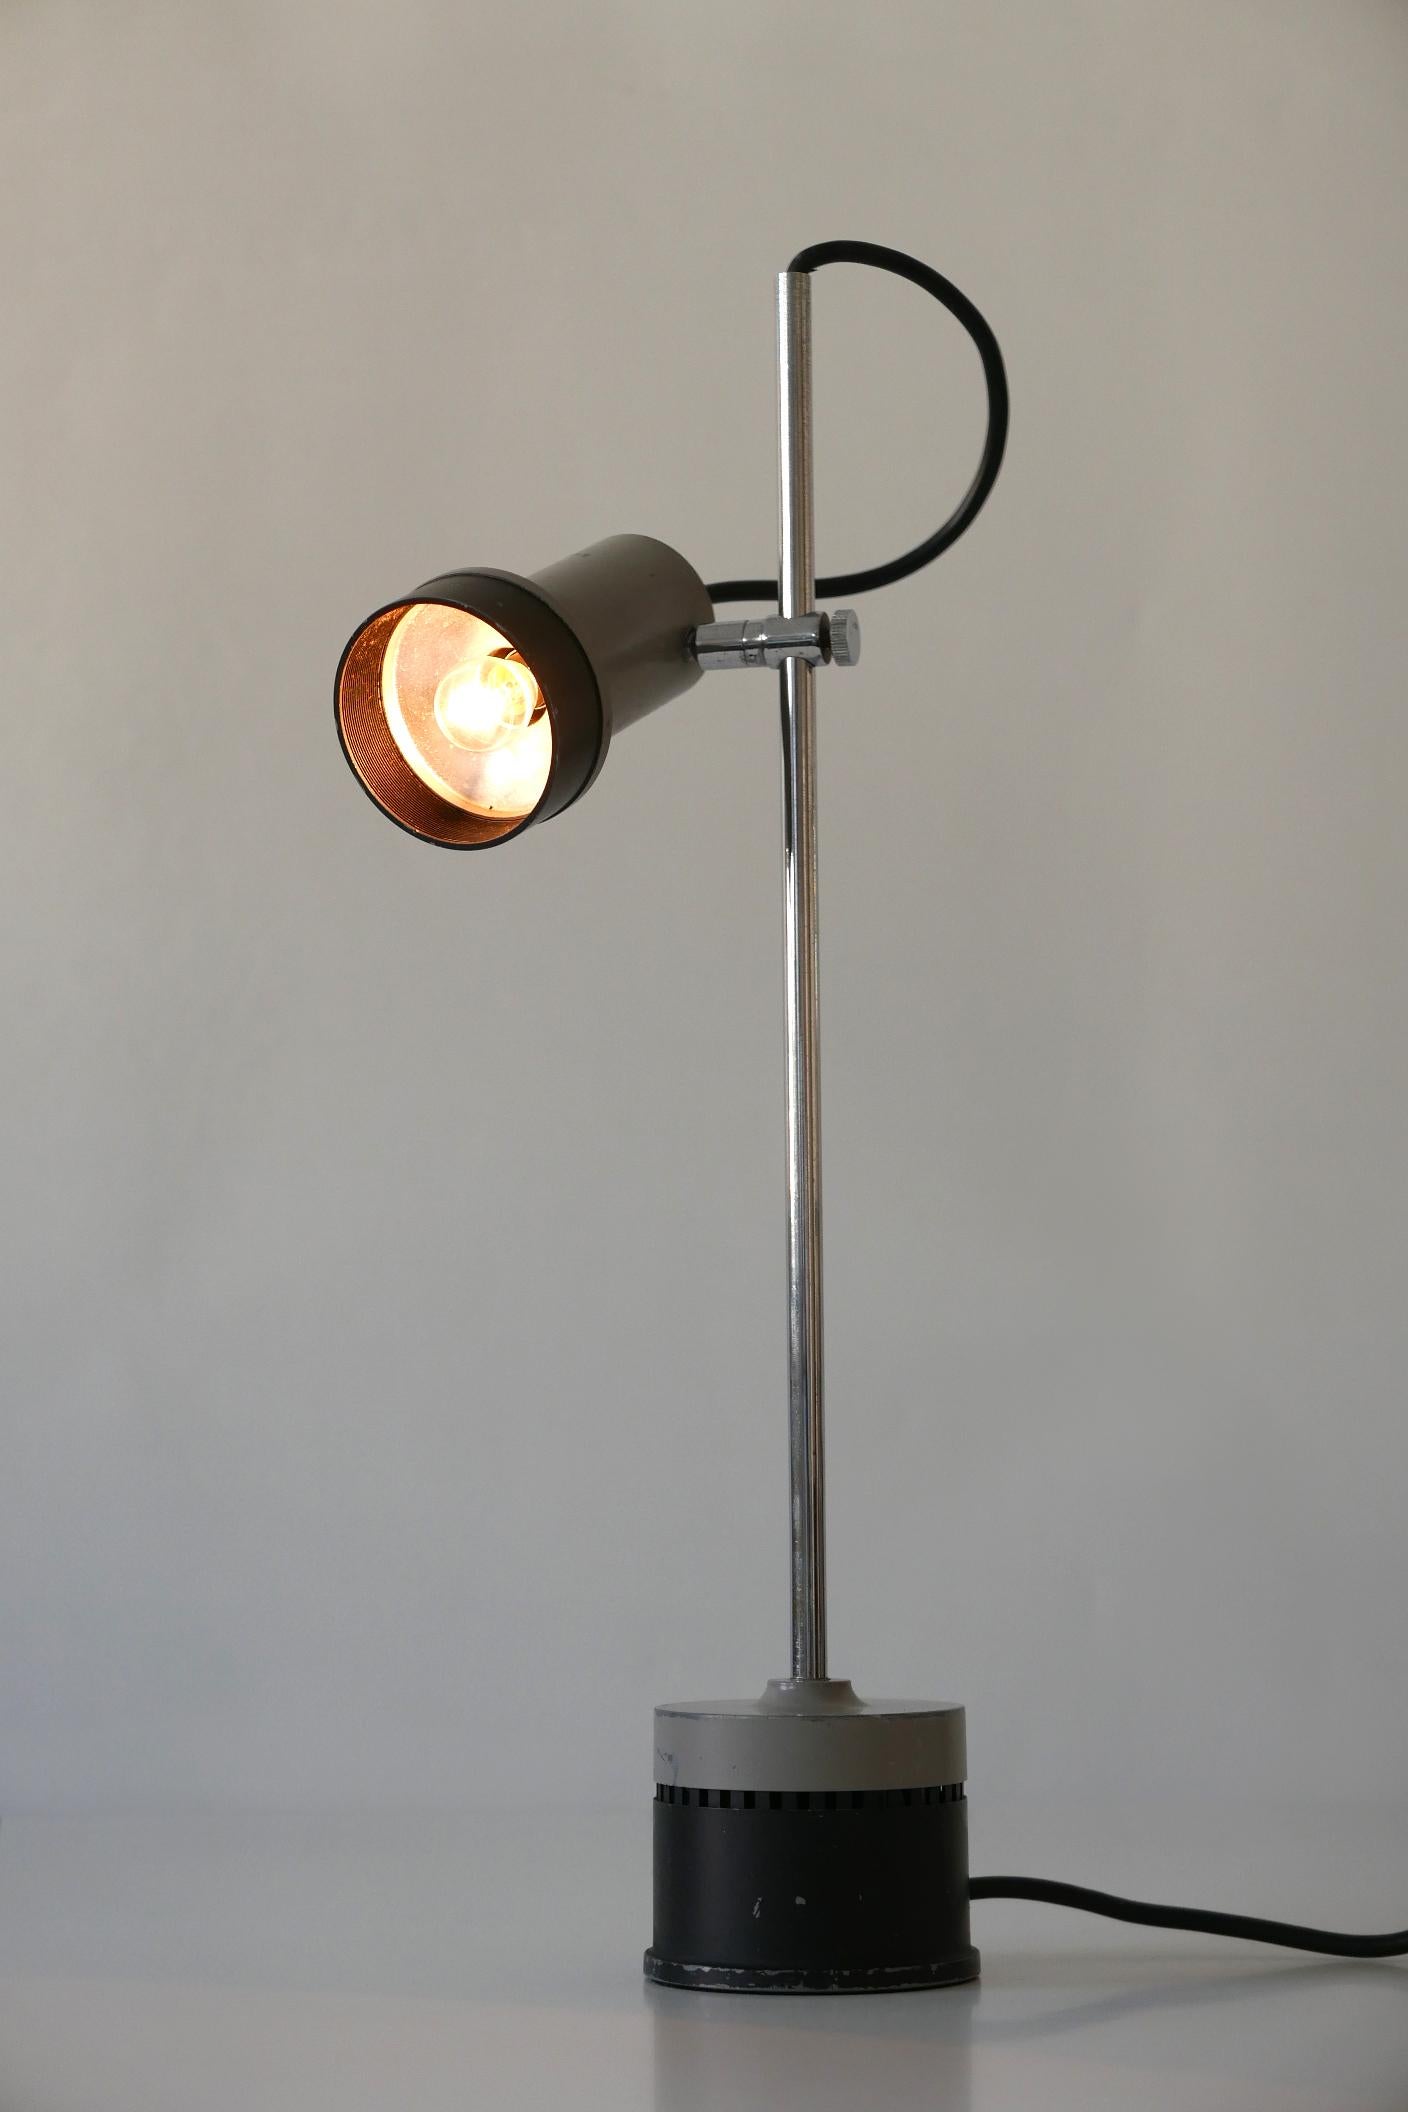 Extremely rare, articulated Mid-Century Modern table lamp or desk light. Designed and manufactured probably in 1960s, Germany. Height and lamp shade adjustable in various position.

Executed in chrome-plated steel and black and gray enameled